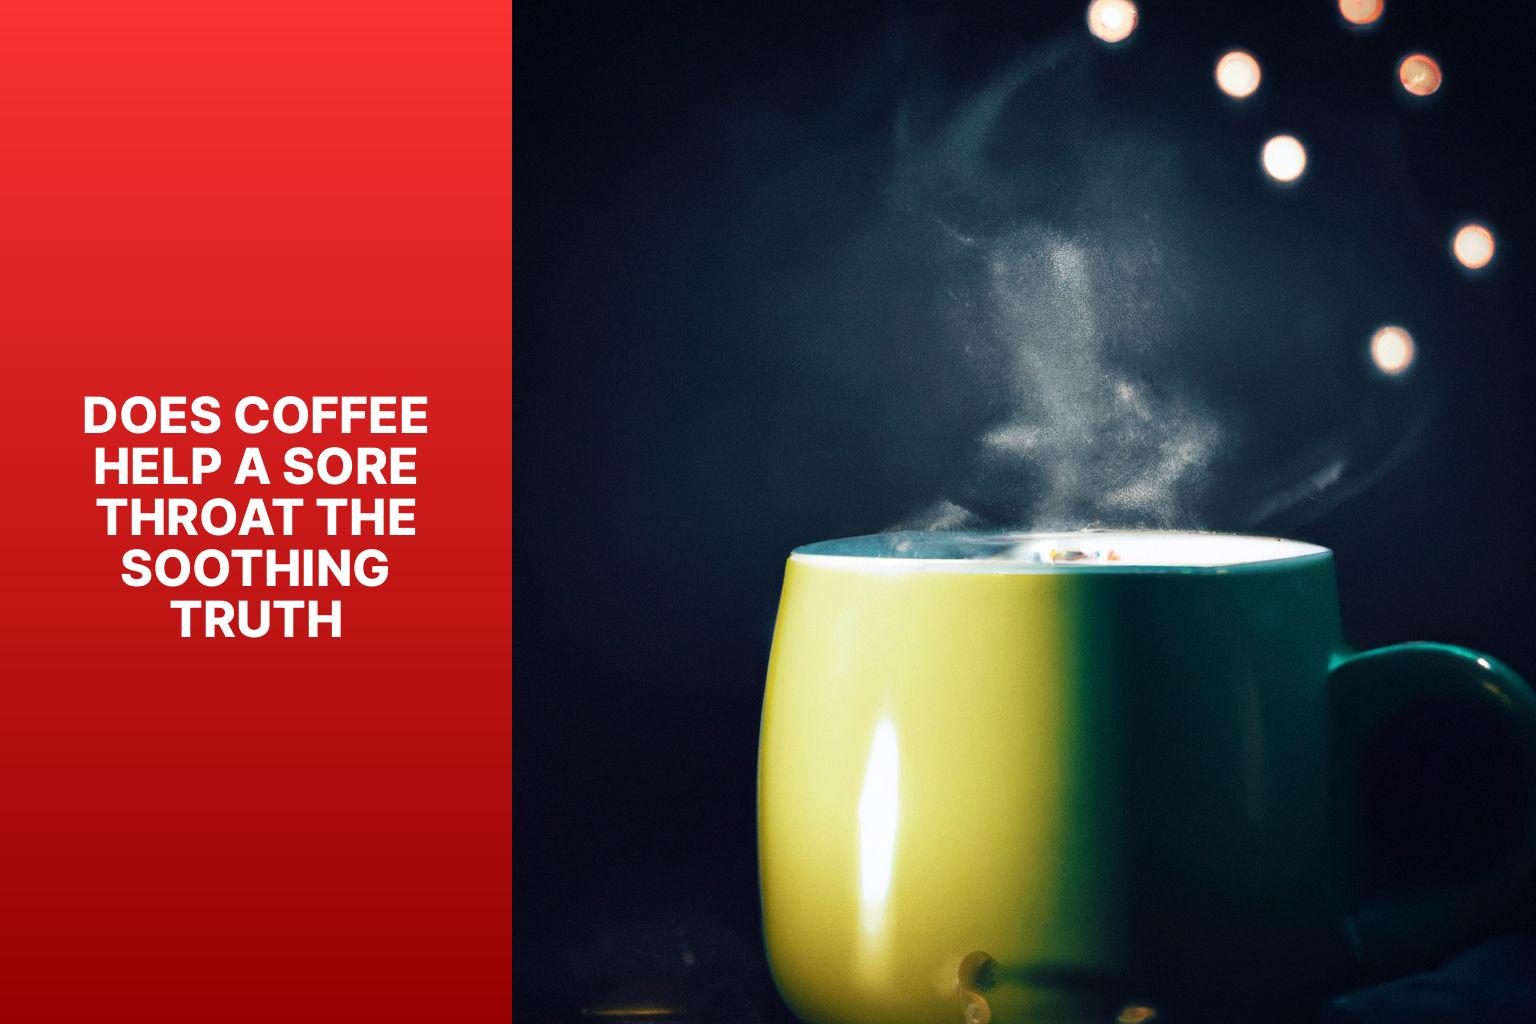 Does Coffee Help a Sore Throat? The Soothing Truth